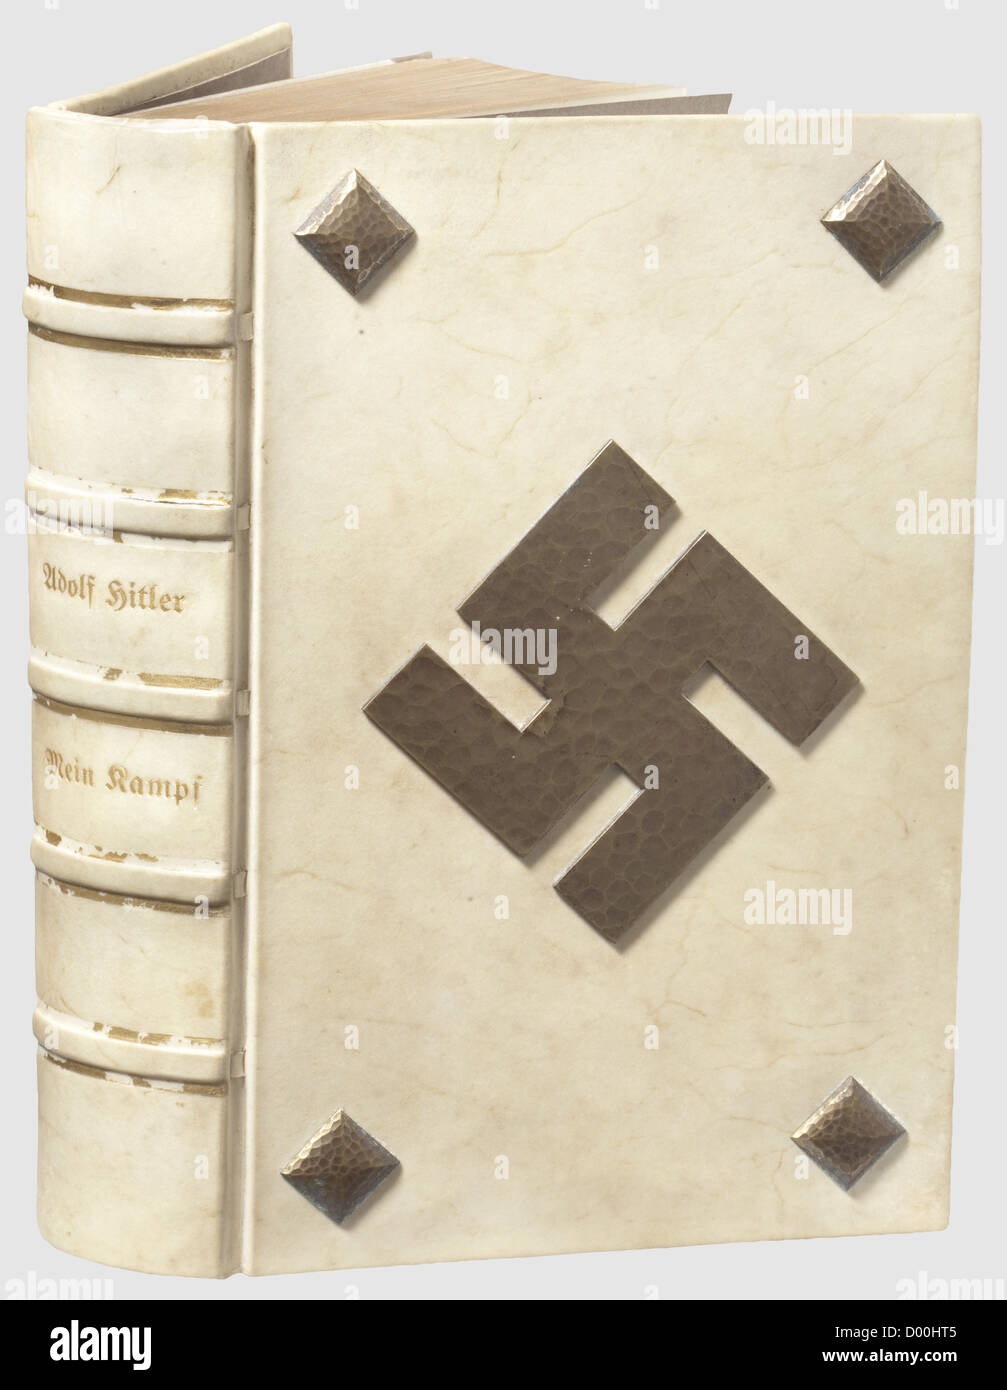 Jacques Buser-Kobler(BUKO)- a deluxe 'Mein Kampf' edition with Hitler dedication to NSDAP-Ortsgruppe Basel 1935,Combined 1934 edition with gold-edged pages and parchment cover with applied,hammered brass decorative nails as well as obverse swastika,the spine stamped in gold.On the inner cover an ex libris(bookplate)'Büchersammlung der National Sozialist.Deutschen Arbeiter Partei Ortsgruppe Basel',signed 'BUKO'.On the flyleaf a hand-written dedication by Hitler 'Den Parteigenossen der N.S.D.A.P.-Ortsgruppe Basel herzlichst zugeeignet - Adolf Hitler - ,Additional-Rights-Clearences-Not Available Stock Photo